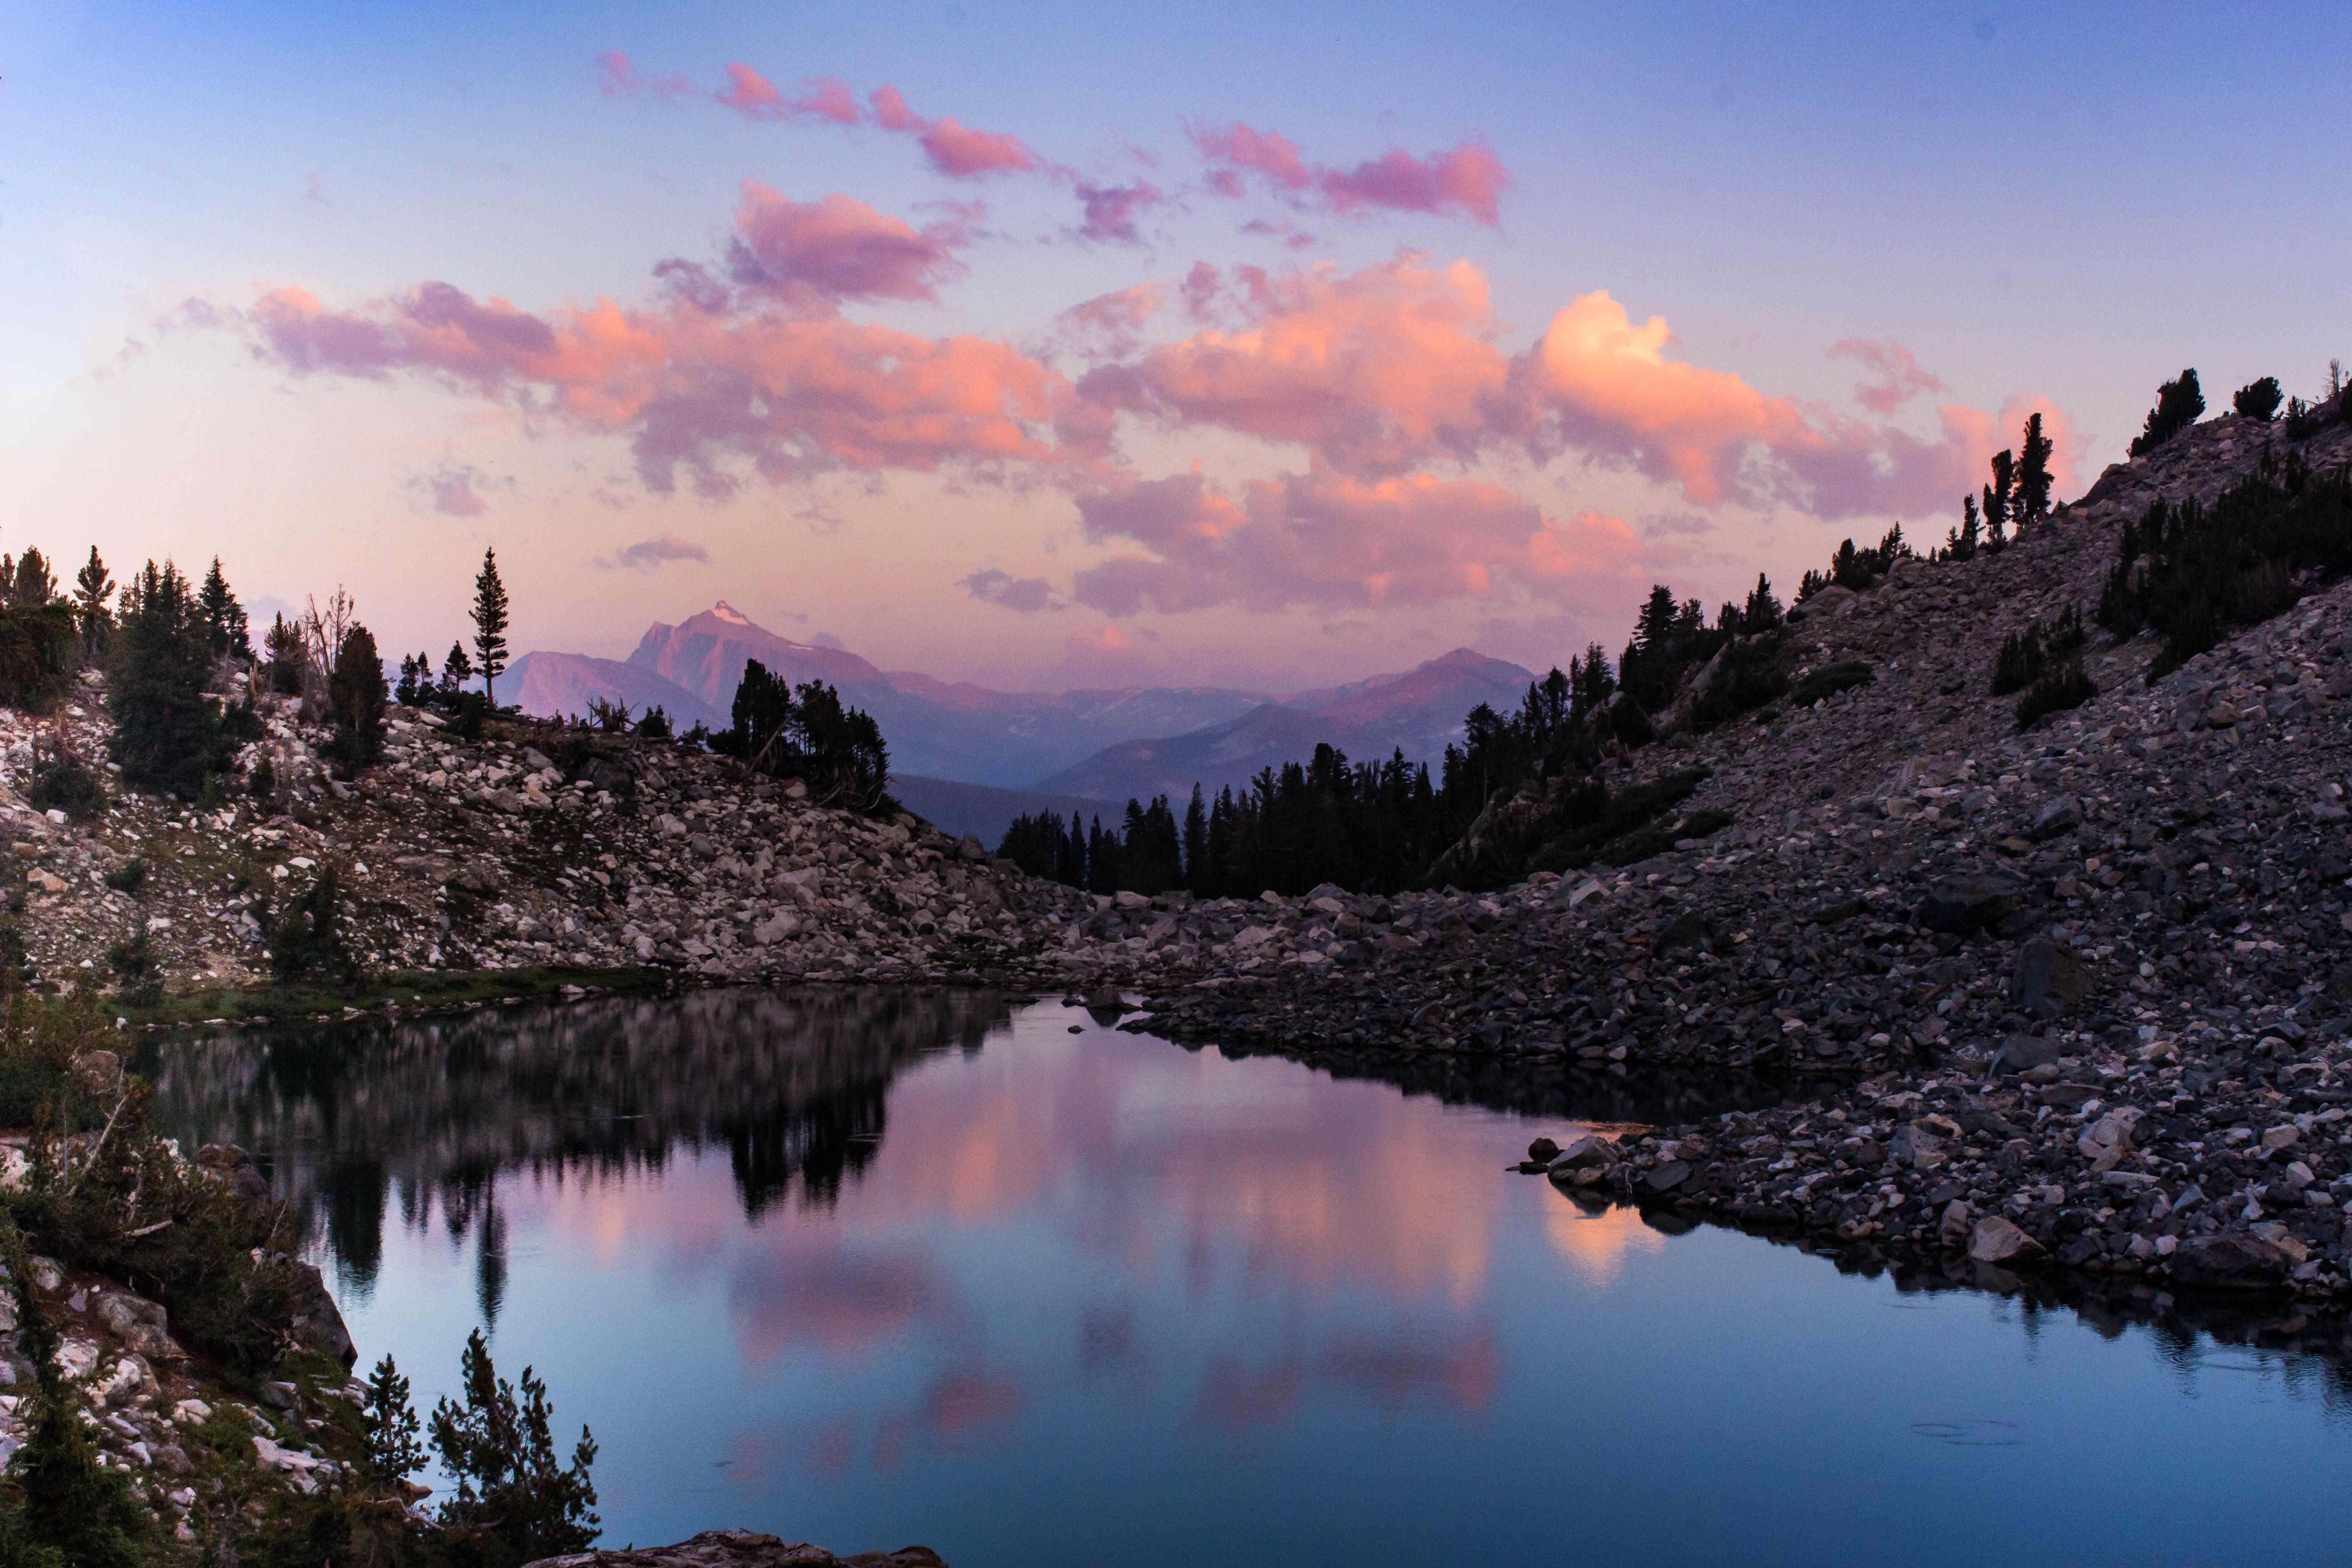 A photo overlooking a lake in the Sierra Nevada mountains at sunset